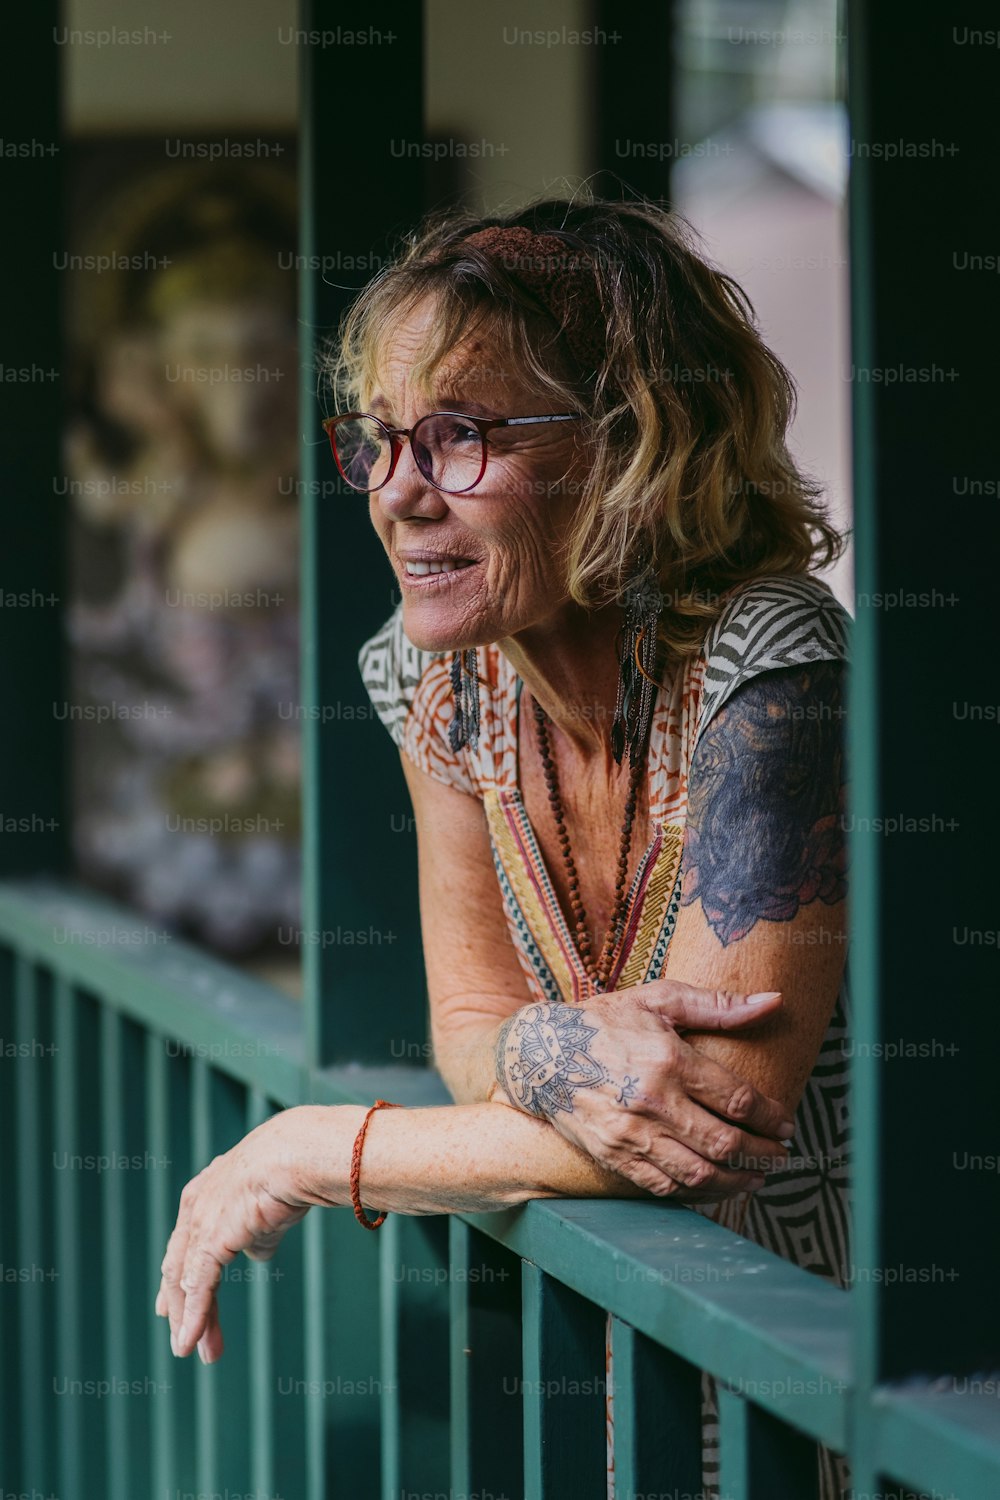 a woman with tattoos on her arm leaning on a railing